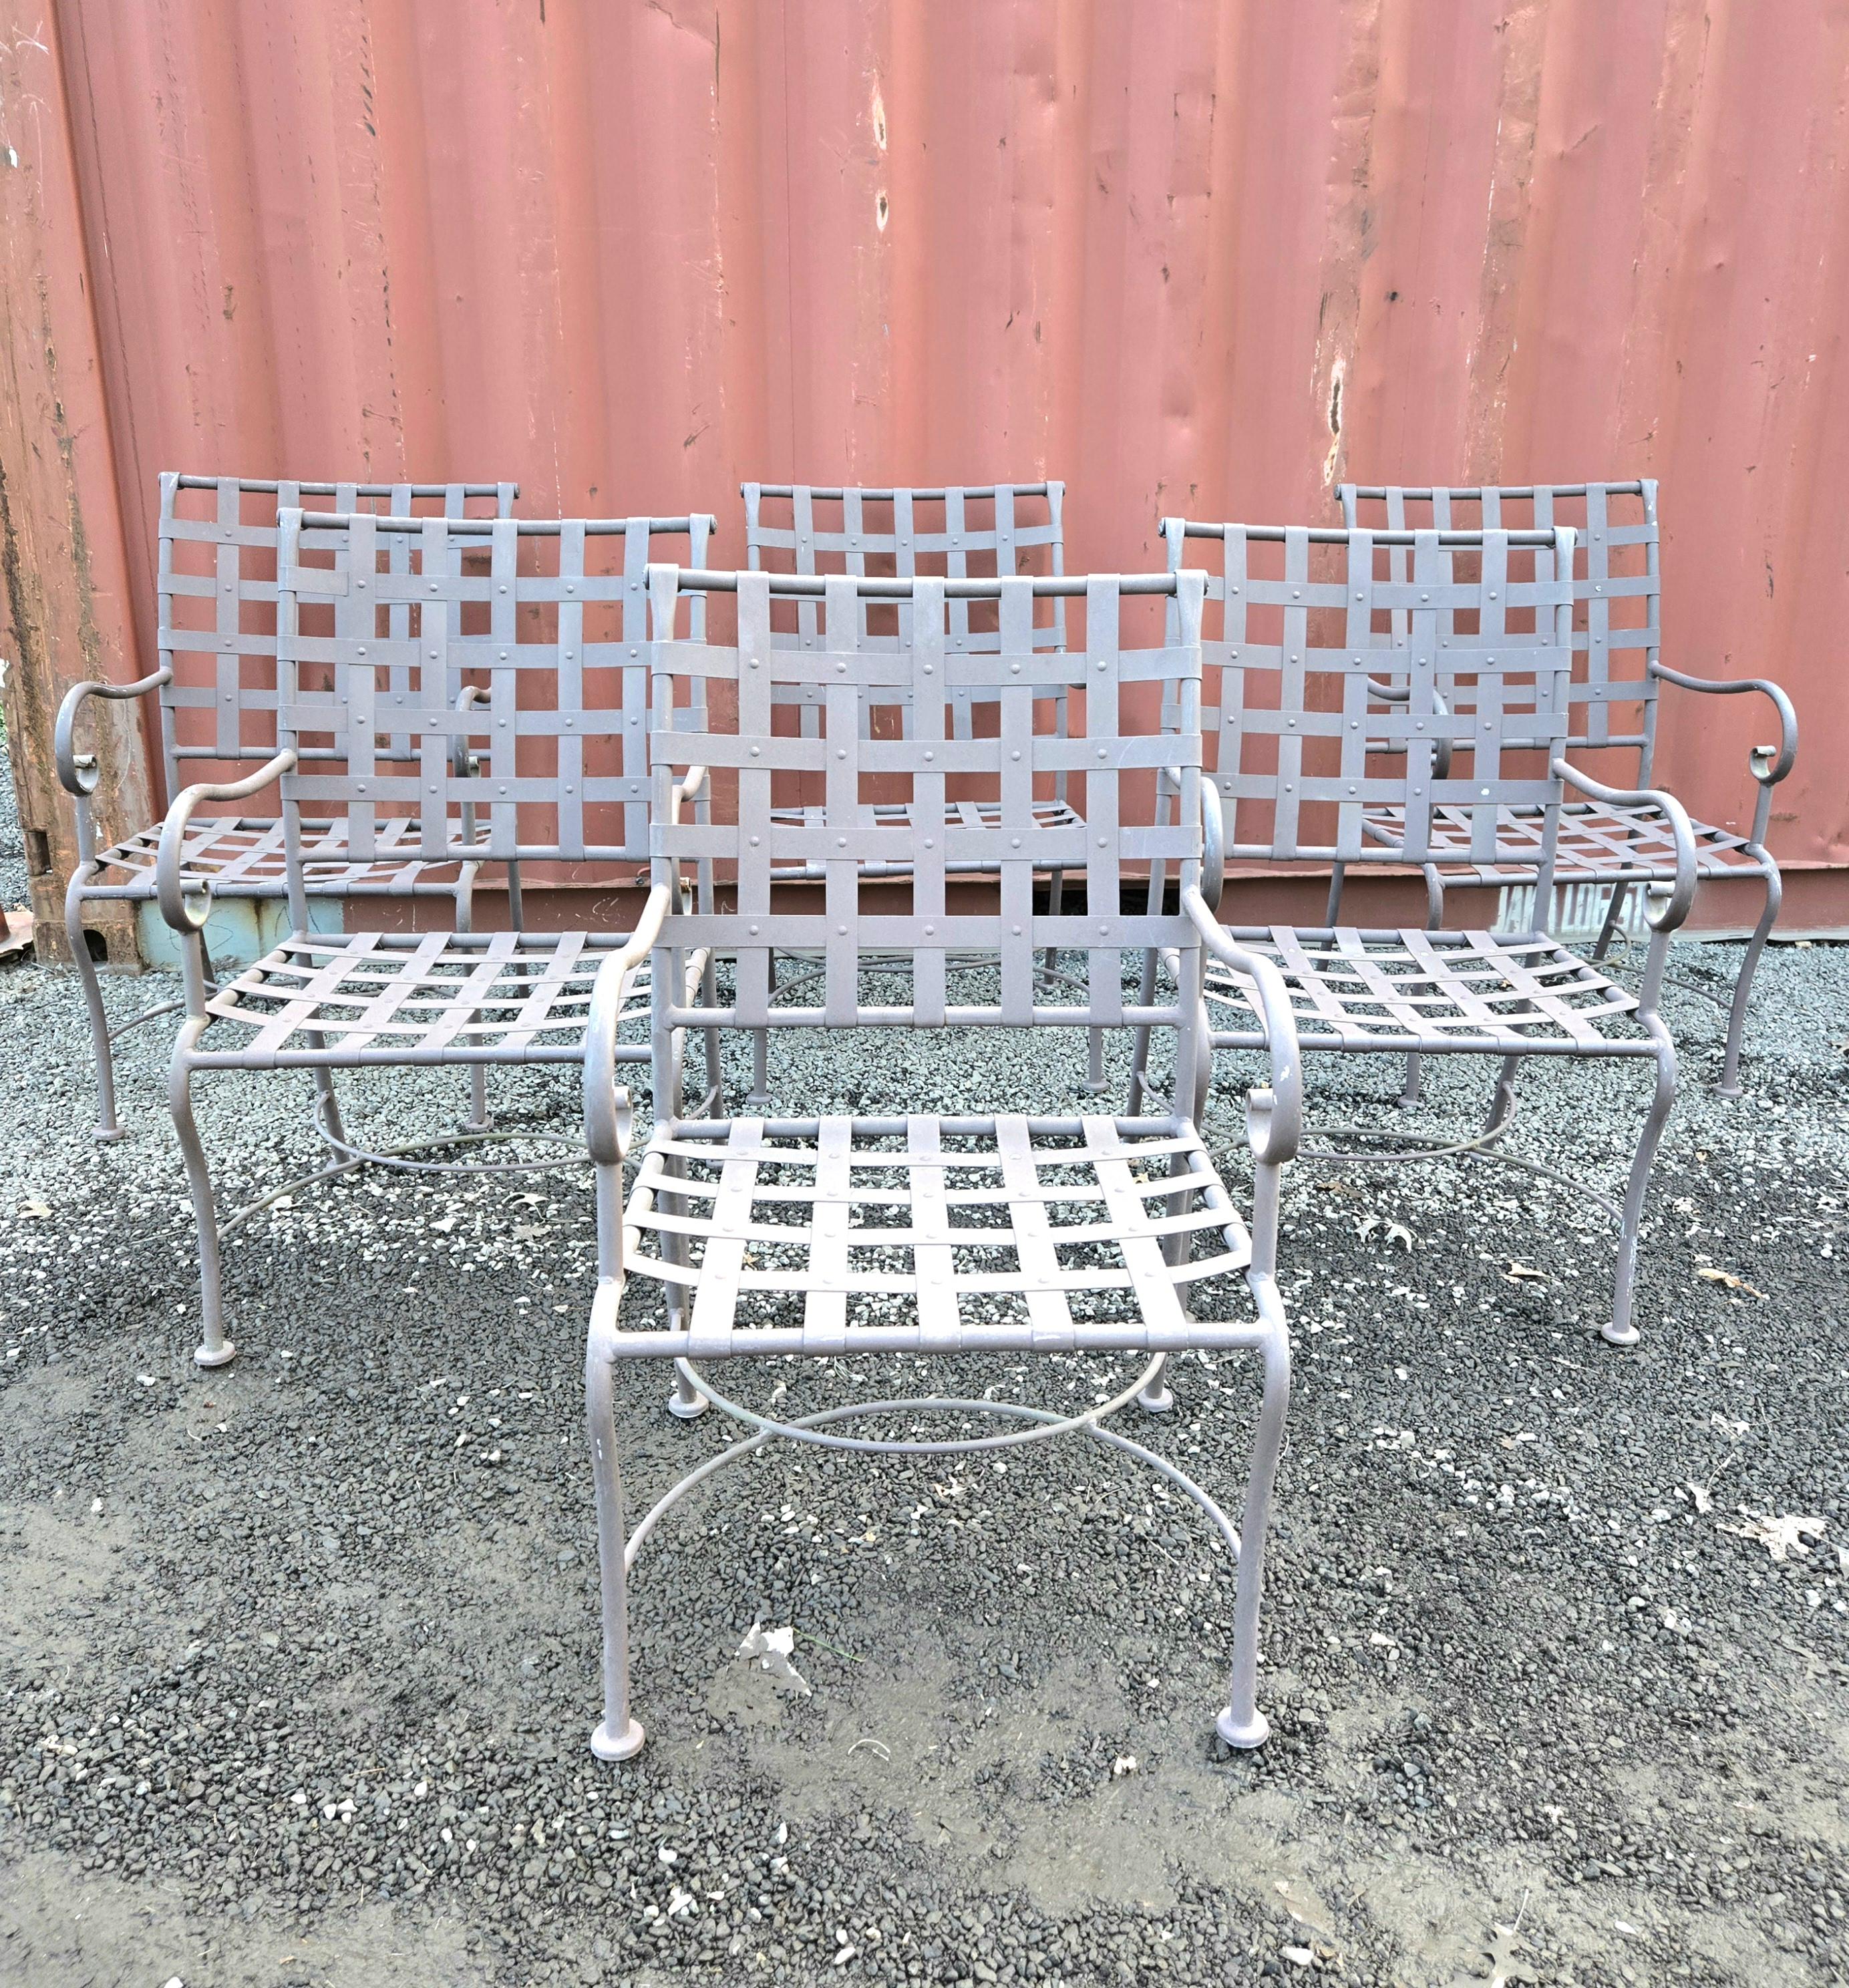 Take a look at this set of Vintage Wrought Iron Lounge Chairs made by Brown Jordan, a renowned maker of wrought iron furniture. These heavy duty chairs are built to last and withstand weather conditions. Pairs perfectly with the 72